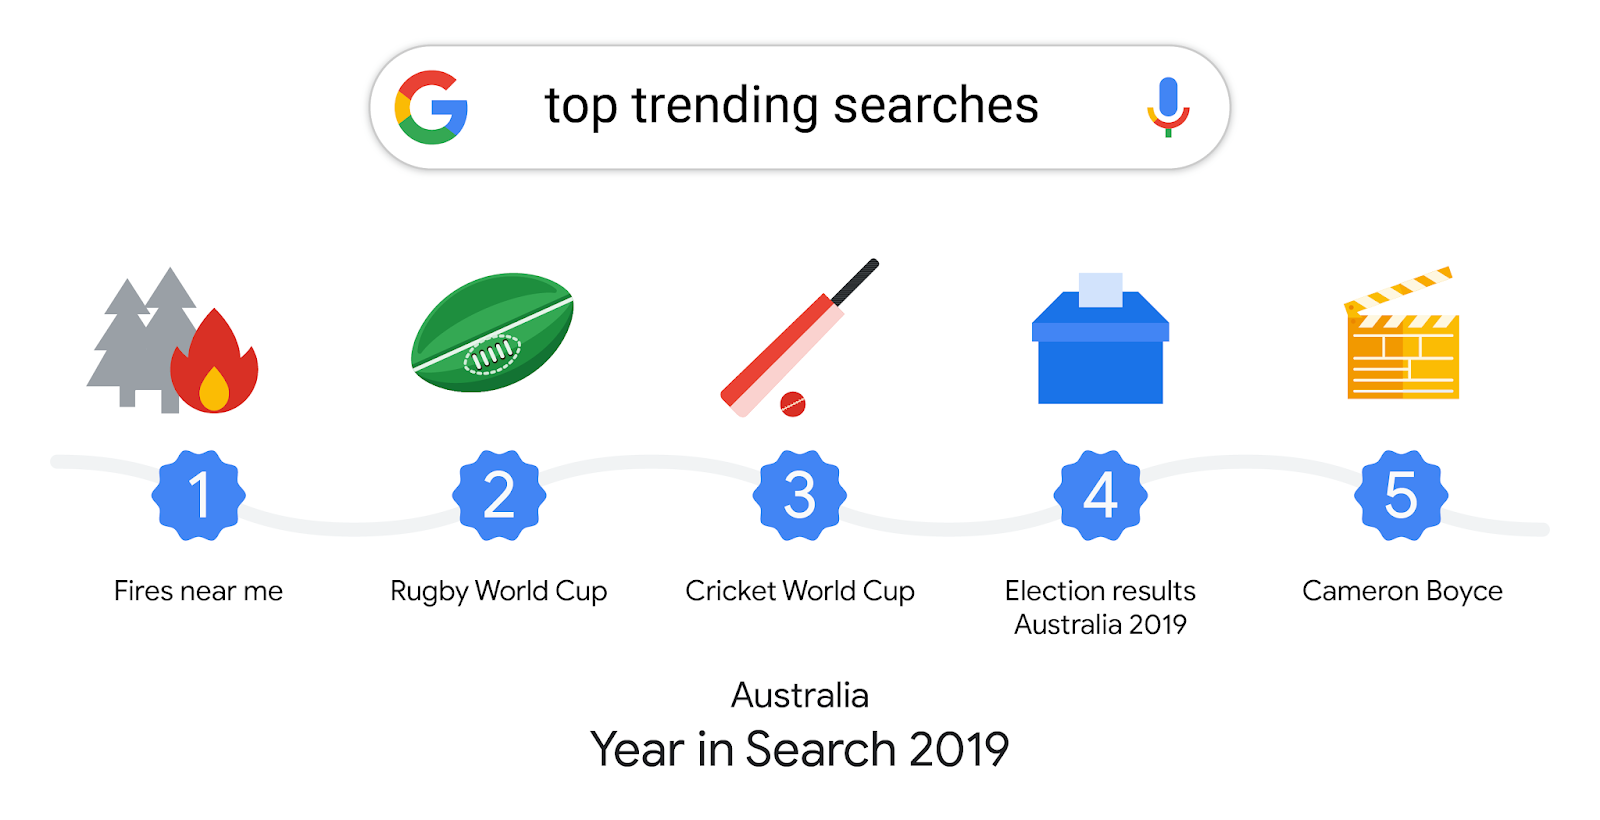 An graphic showing the top trending Searches, with icons for bushfires, rugby, cricket, election results and Cameron Boyce